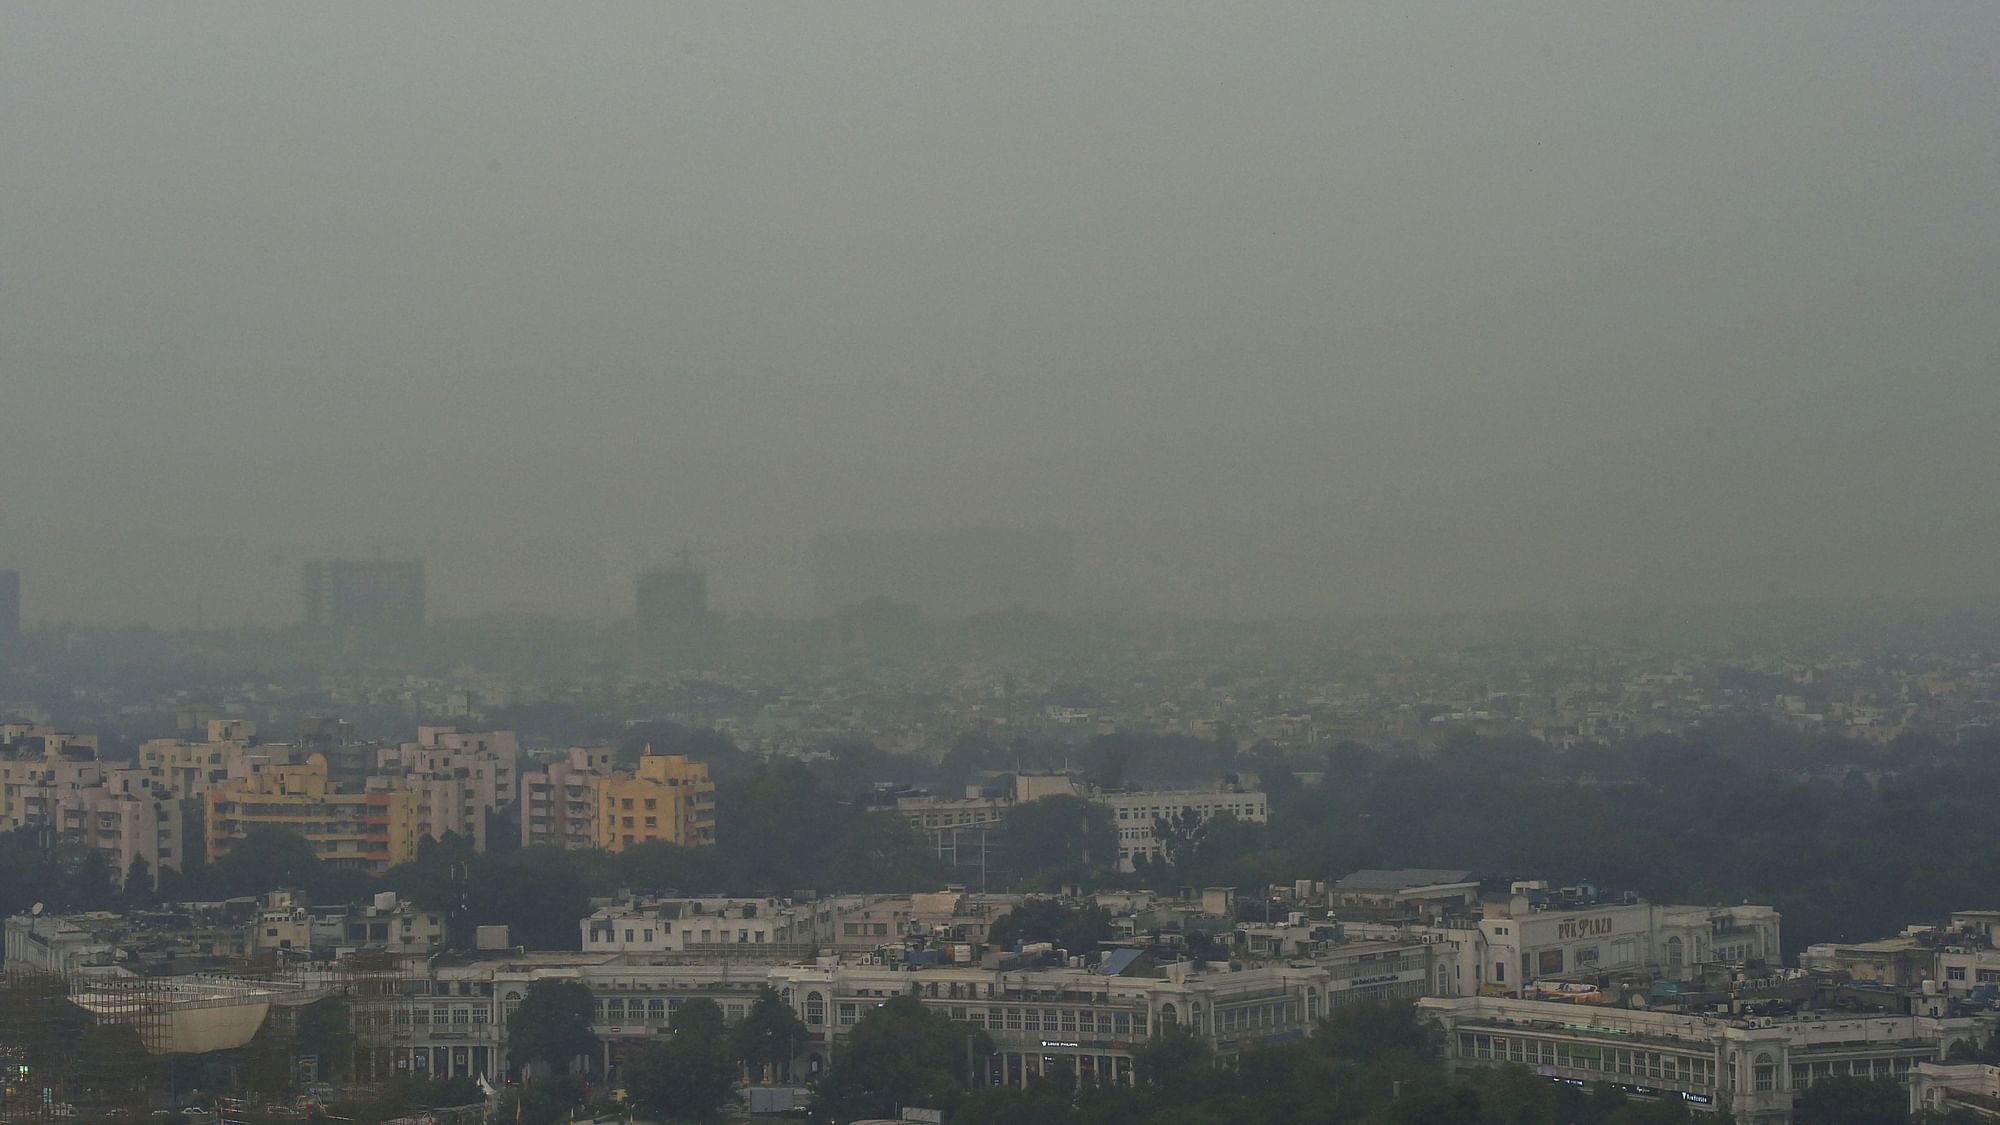 Delhi’s air quality has been deemed ‘hazardous’ by the Ministry of Earth Sciences’ air quality monitor, SAFAR